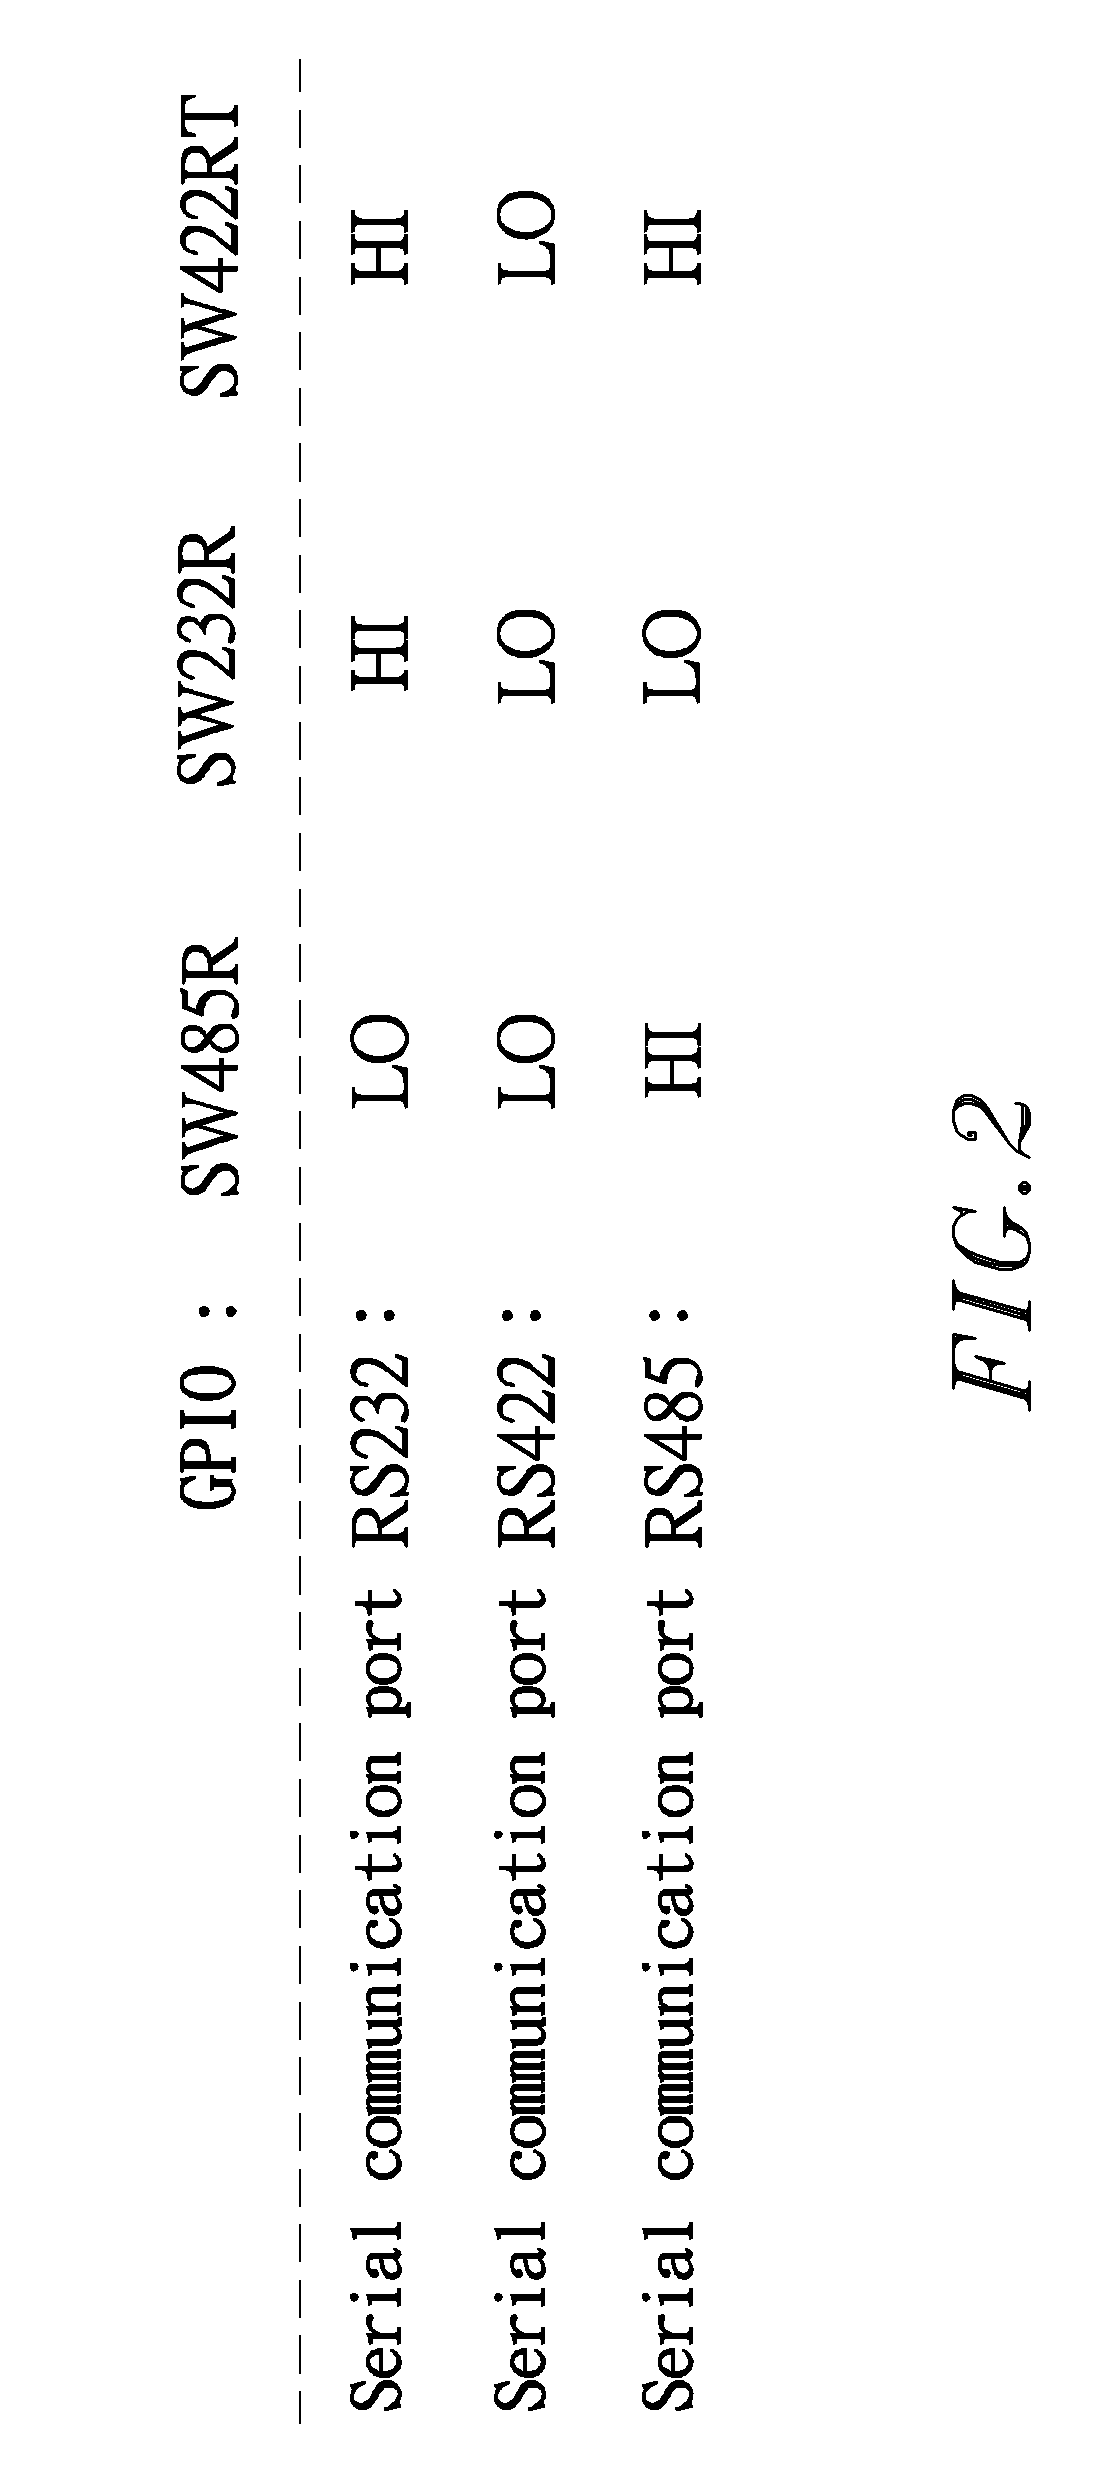 Method for setting up a serial communication port configuration